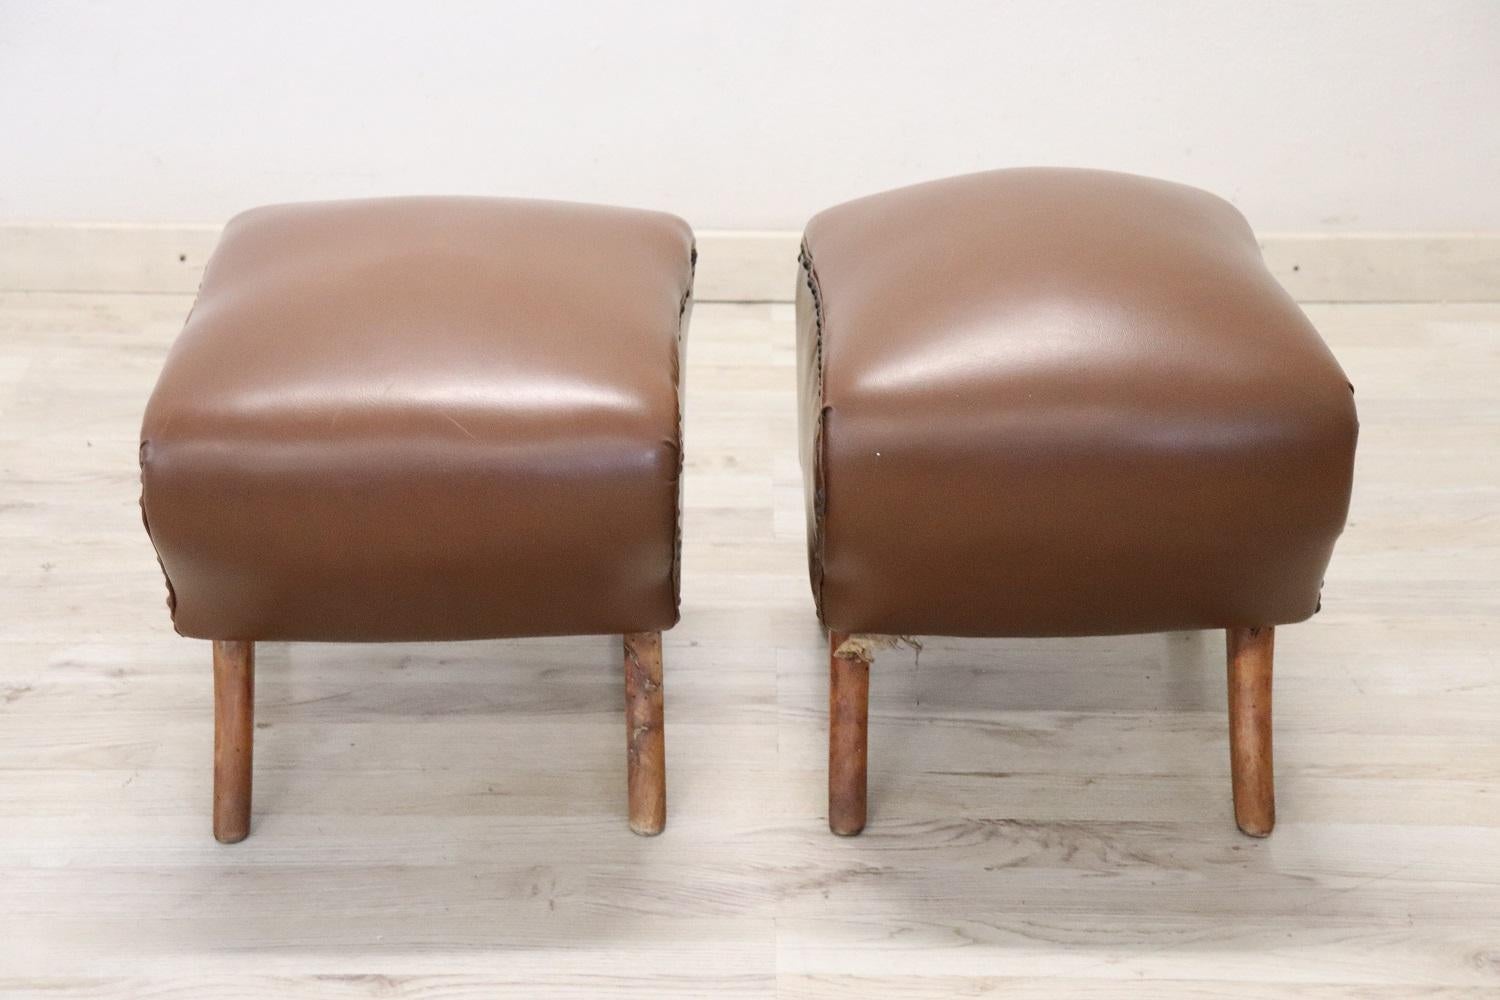 Italian Mid-Century Pair of Stools in Brown Faux Leather For Sale 1